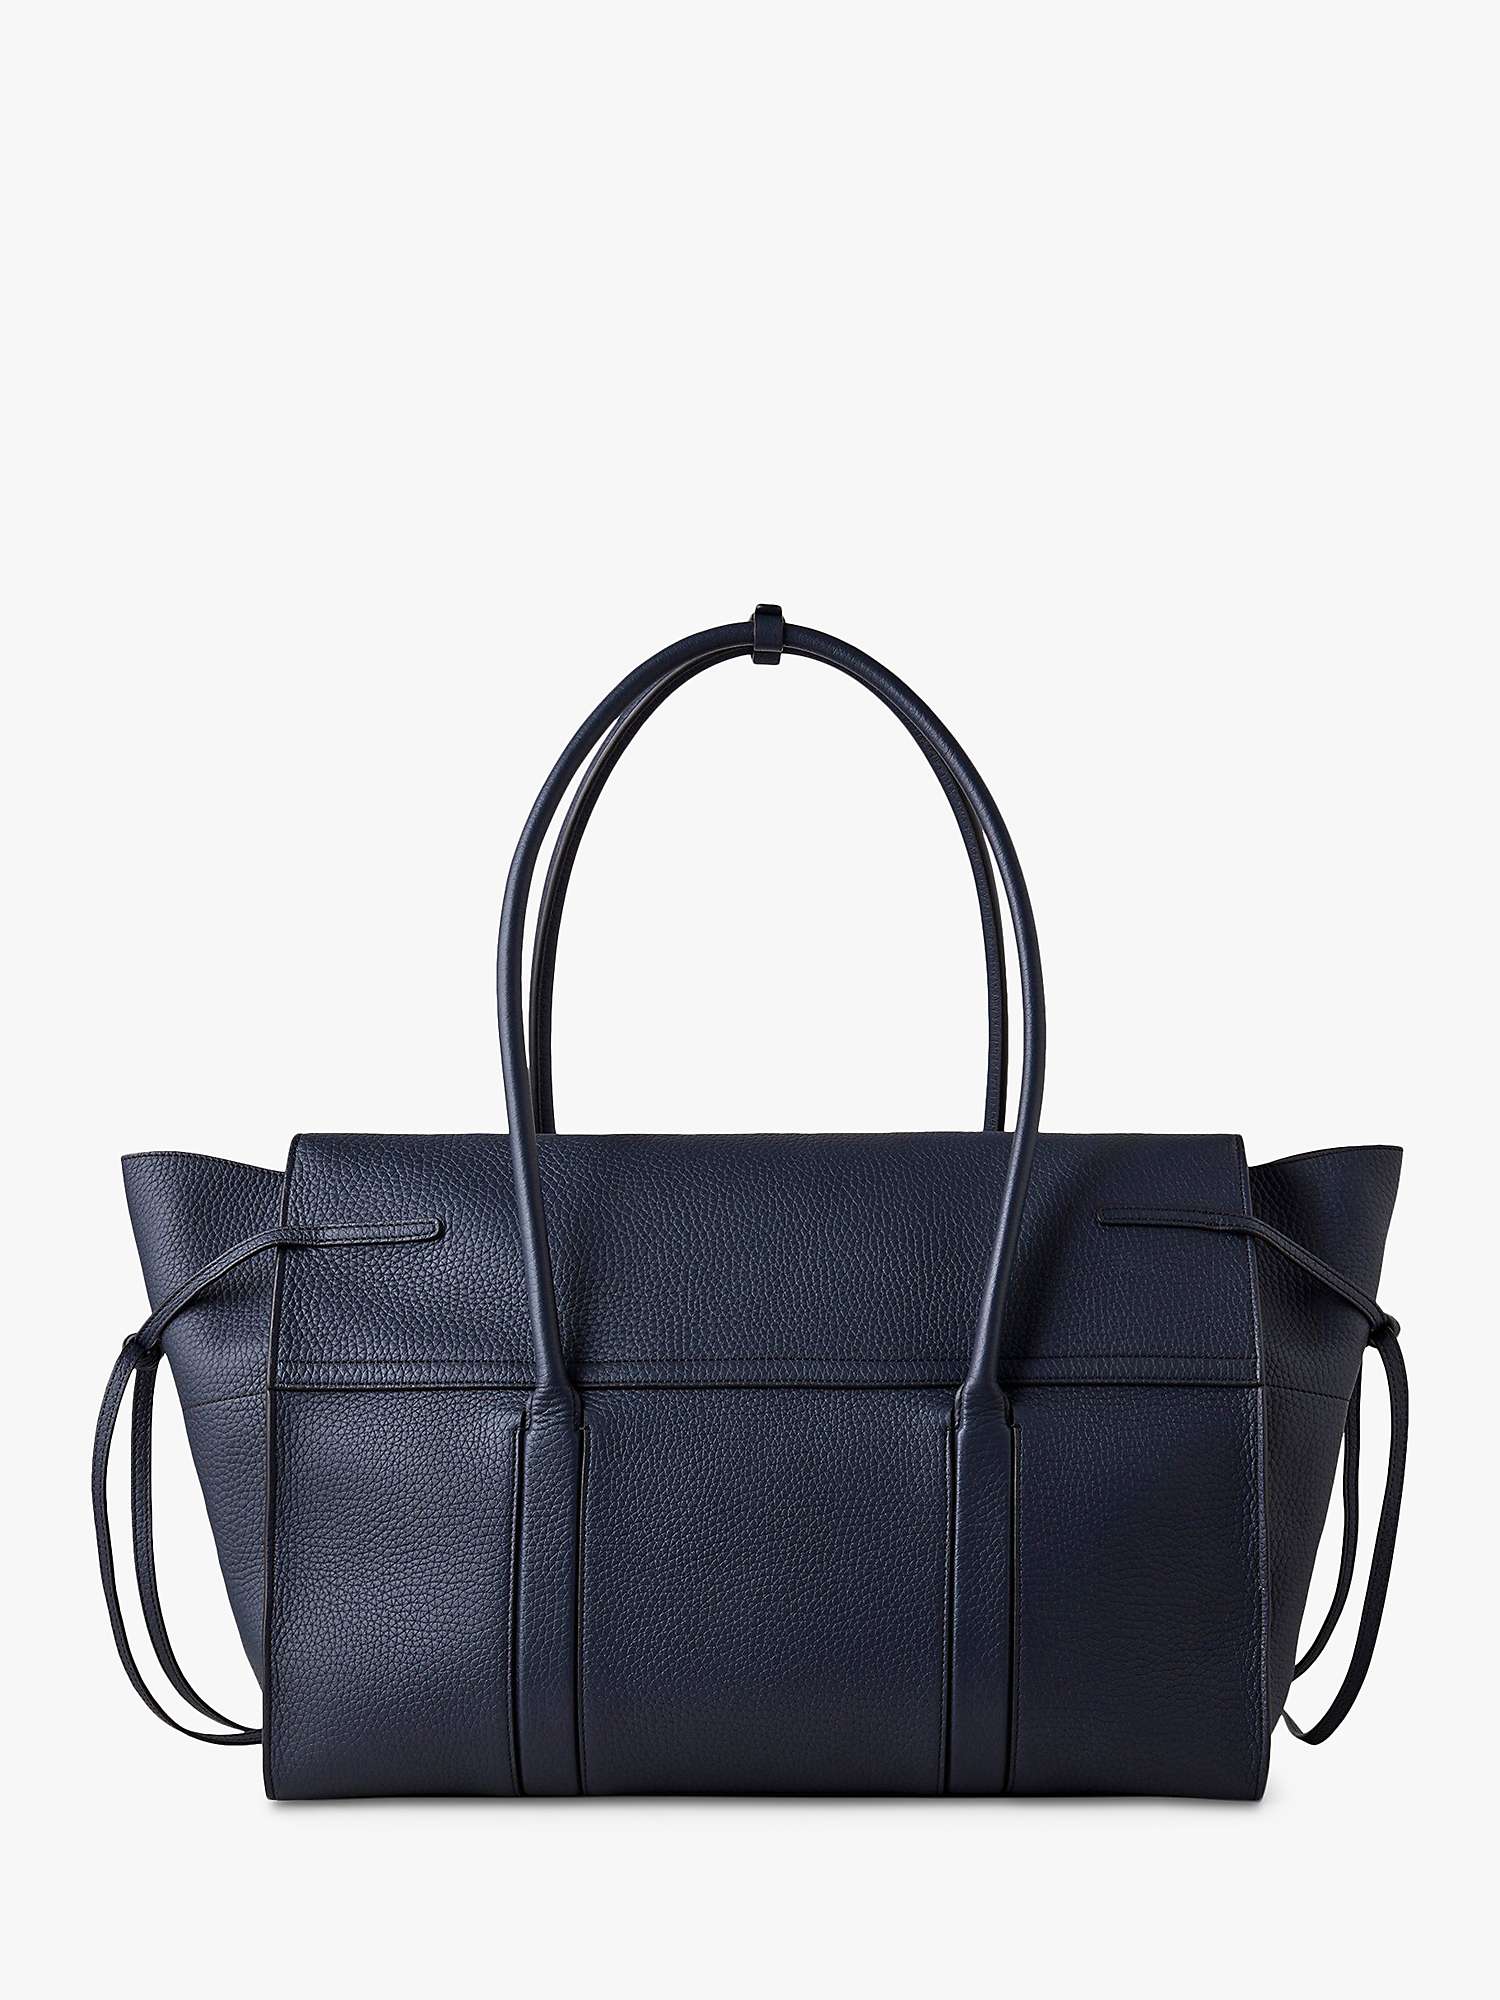 Buy Mulberry Soft Bayswater Heavy Grain Leather Tote Bag Online at johnlewis.com